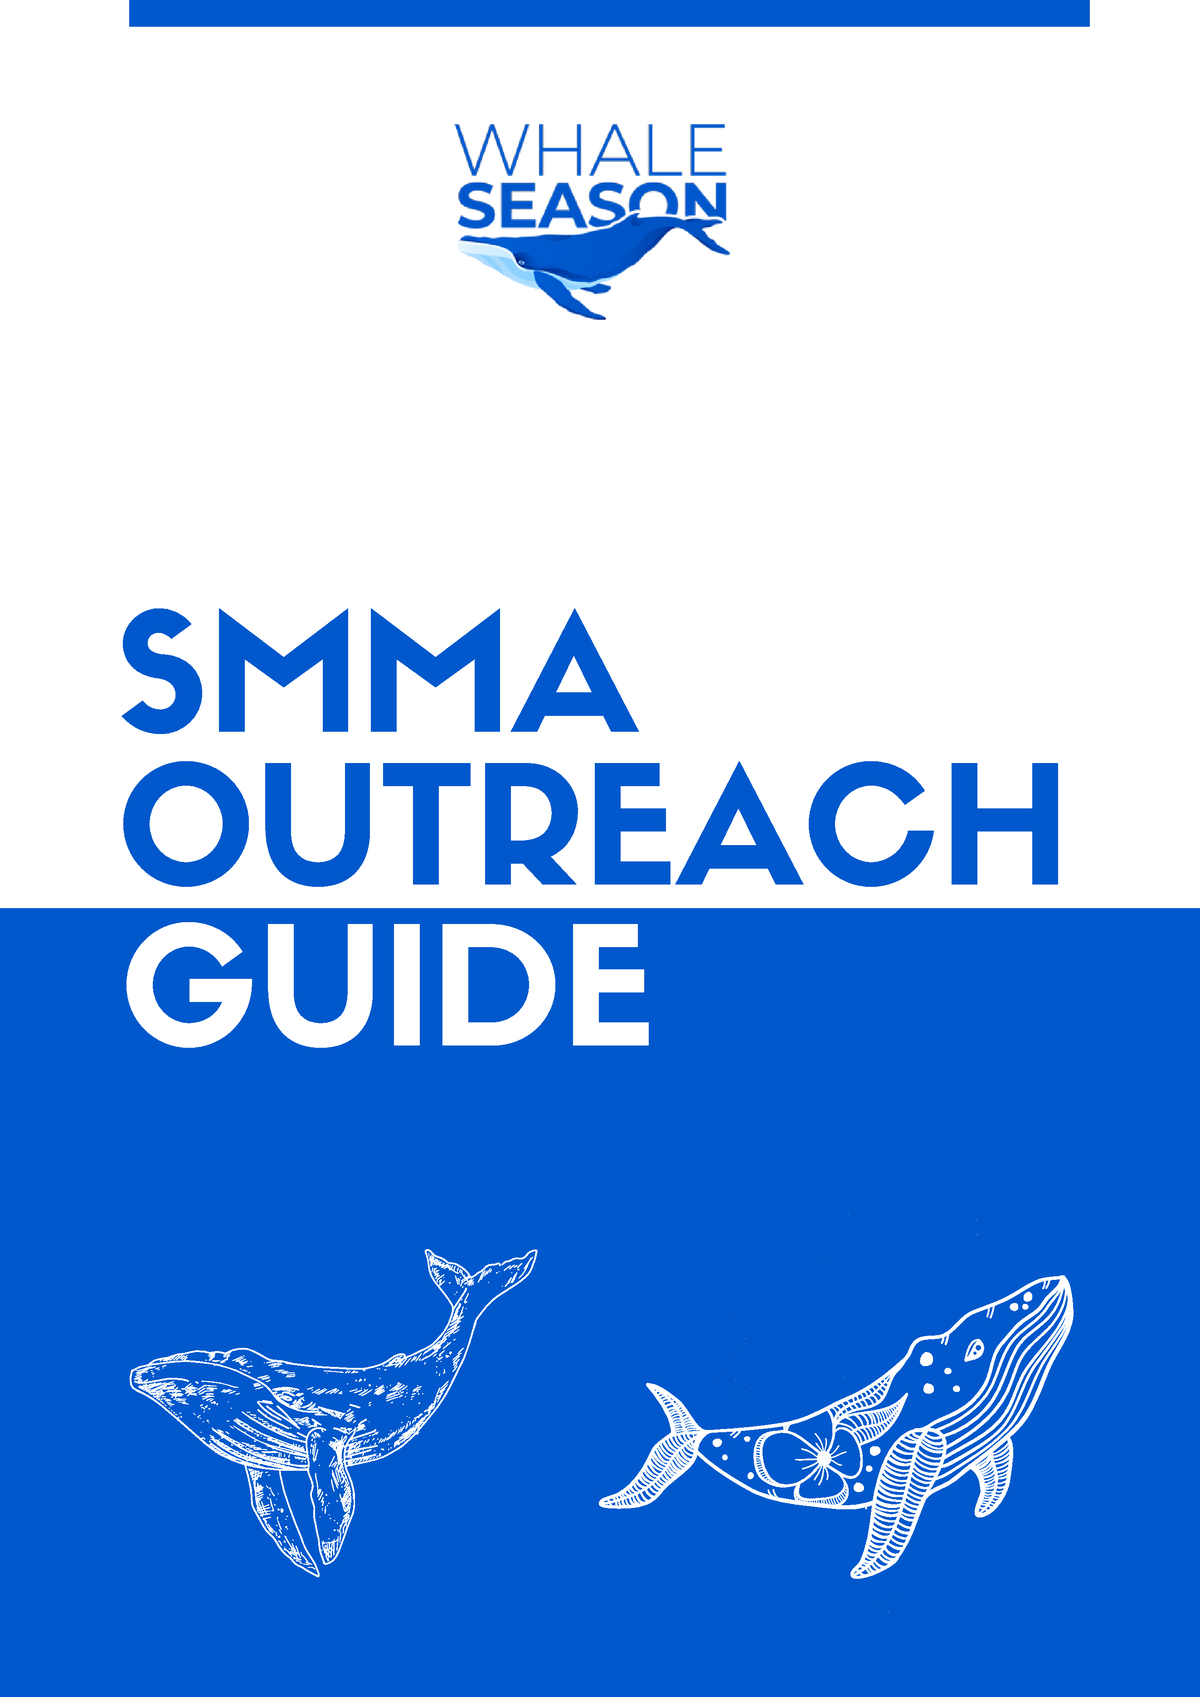 SMMA Outreach Guide SMMA OUTREACH GUIDE SMMA outreach is one of the